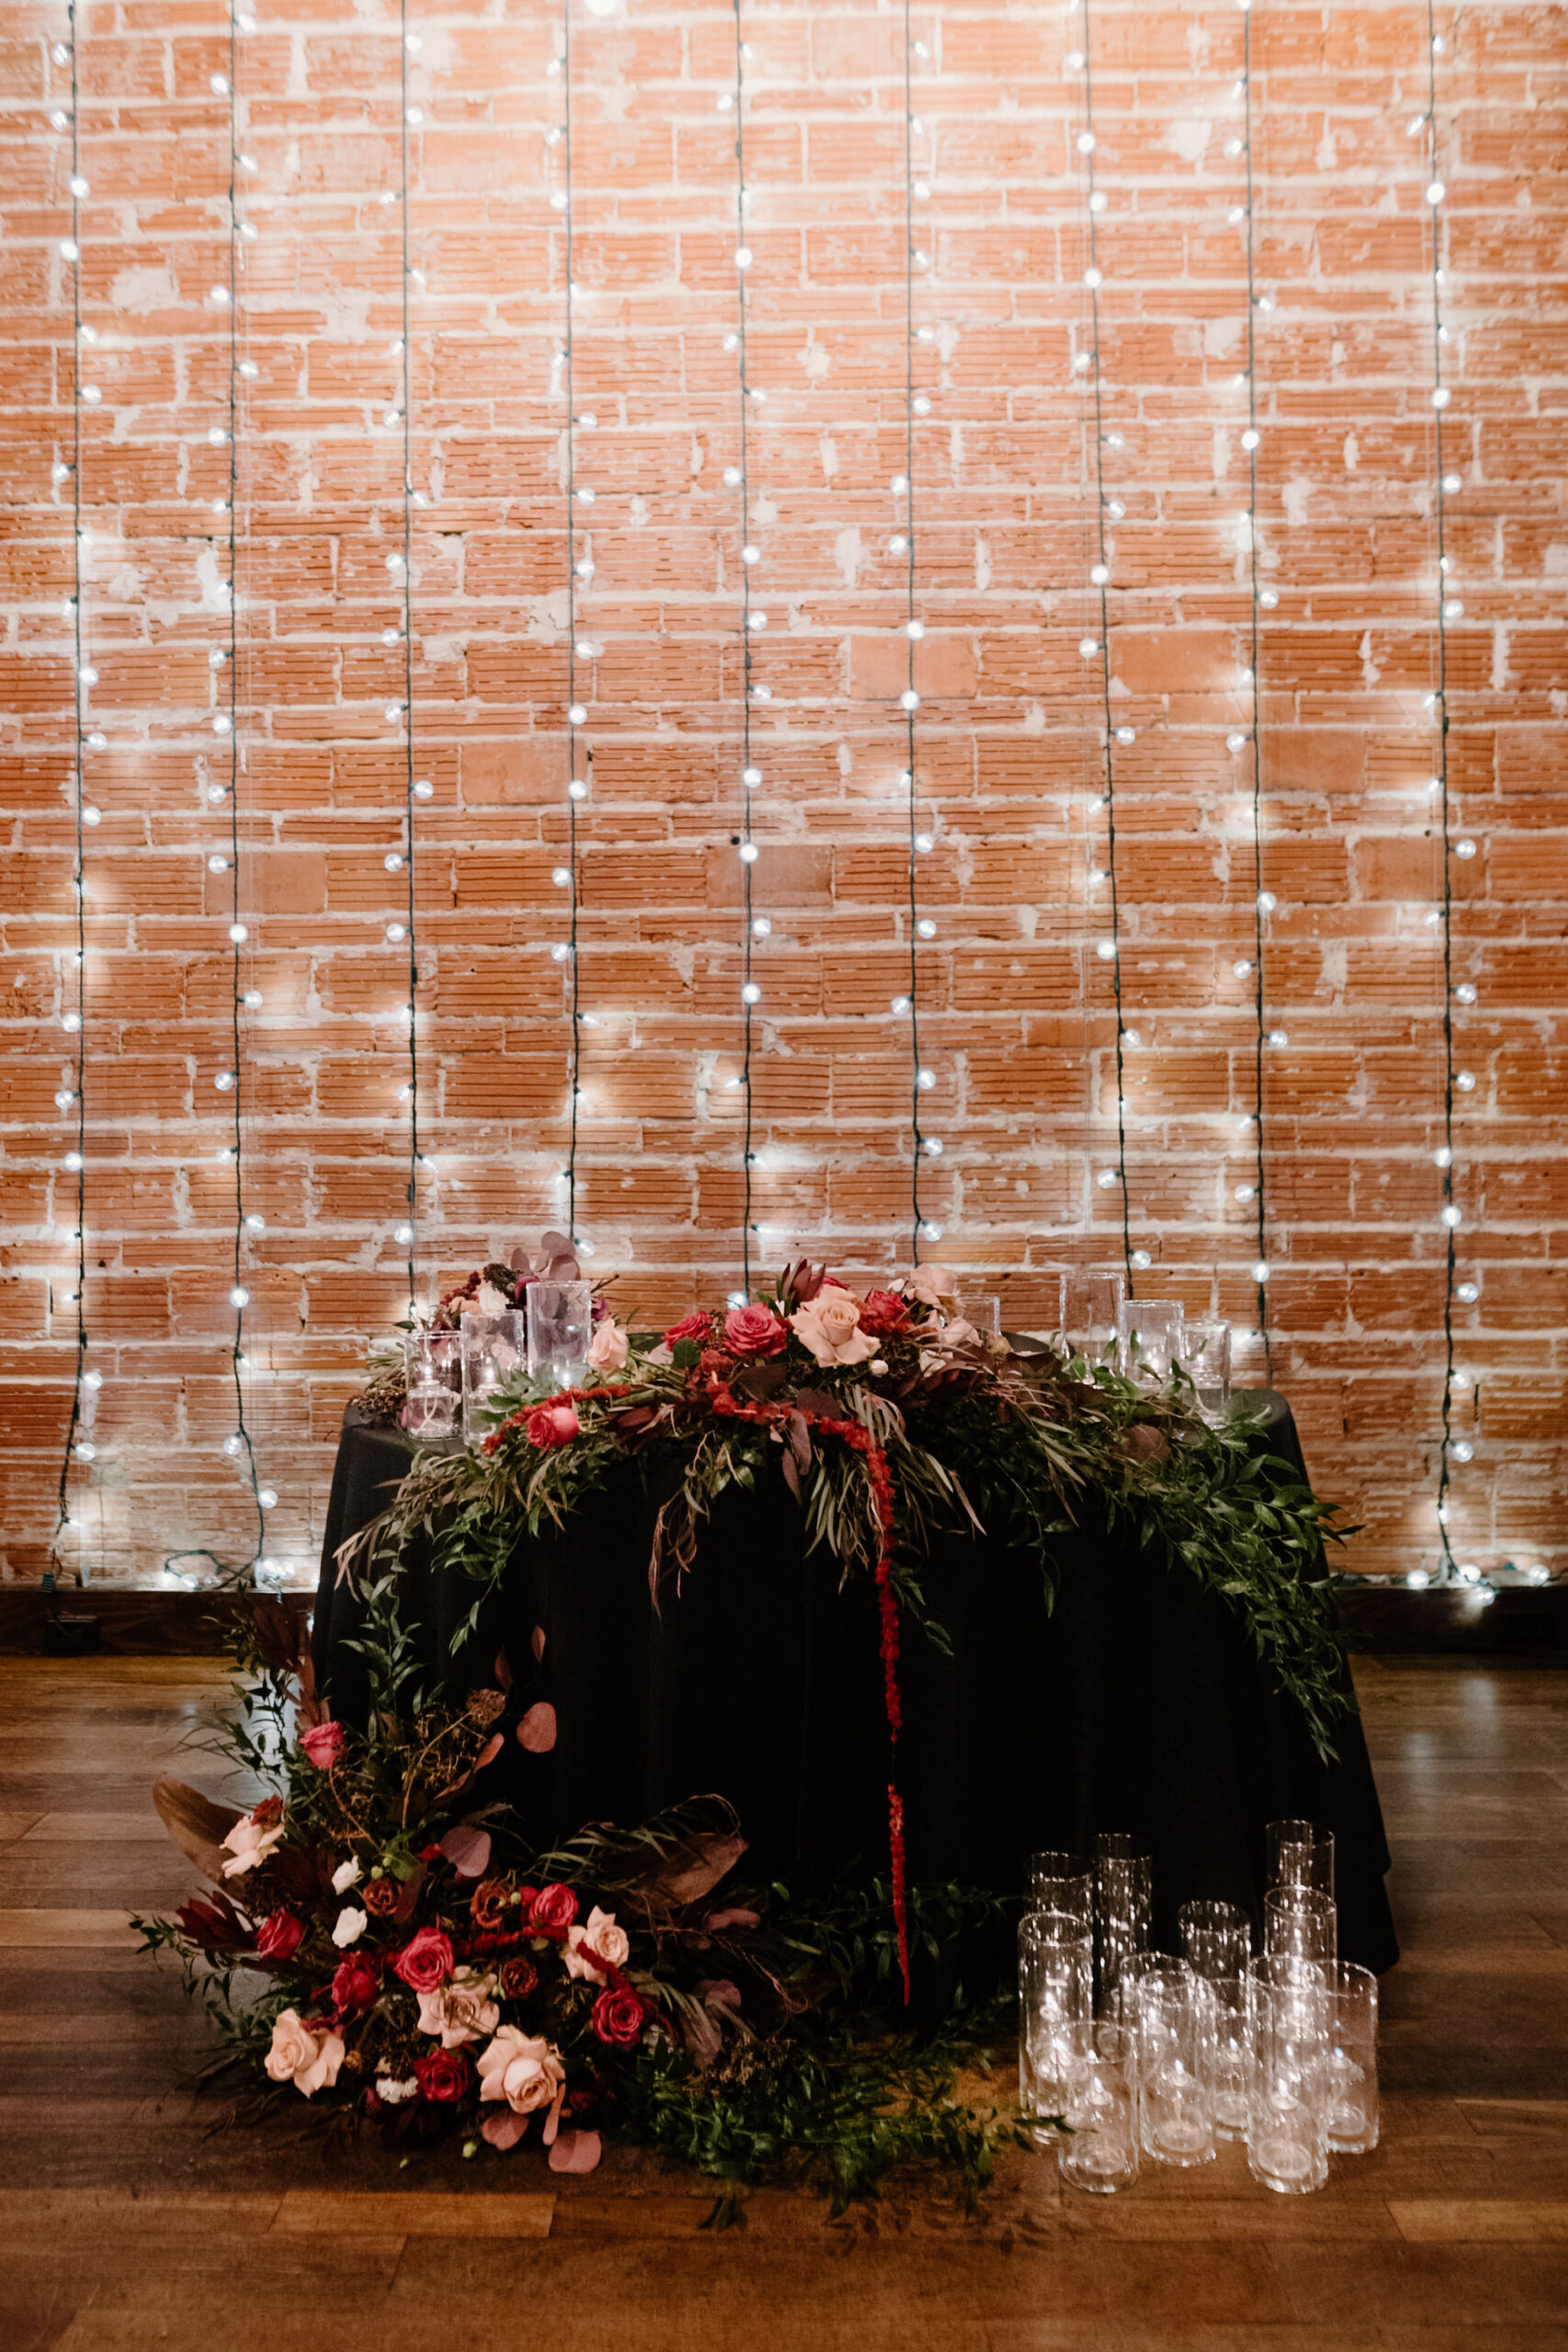 Dark and Moody Sweetheart Head Table with Edgy Floral Arrangements | Hanging Market Lights Backdrop | Romantic Goth Wedding Inspiration